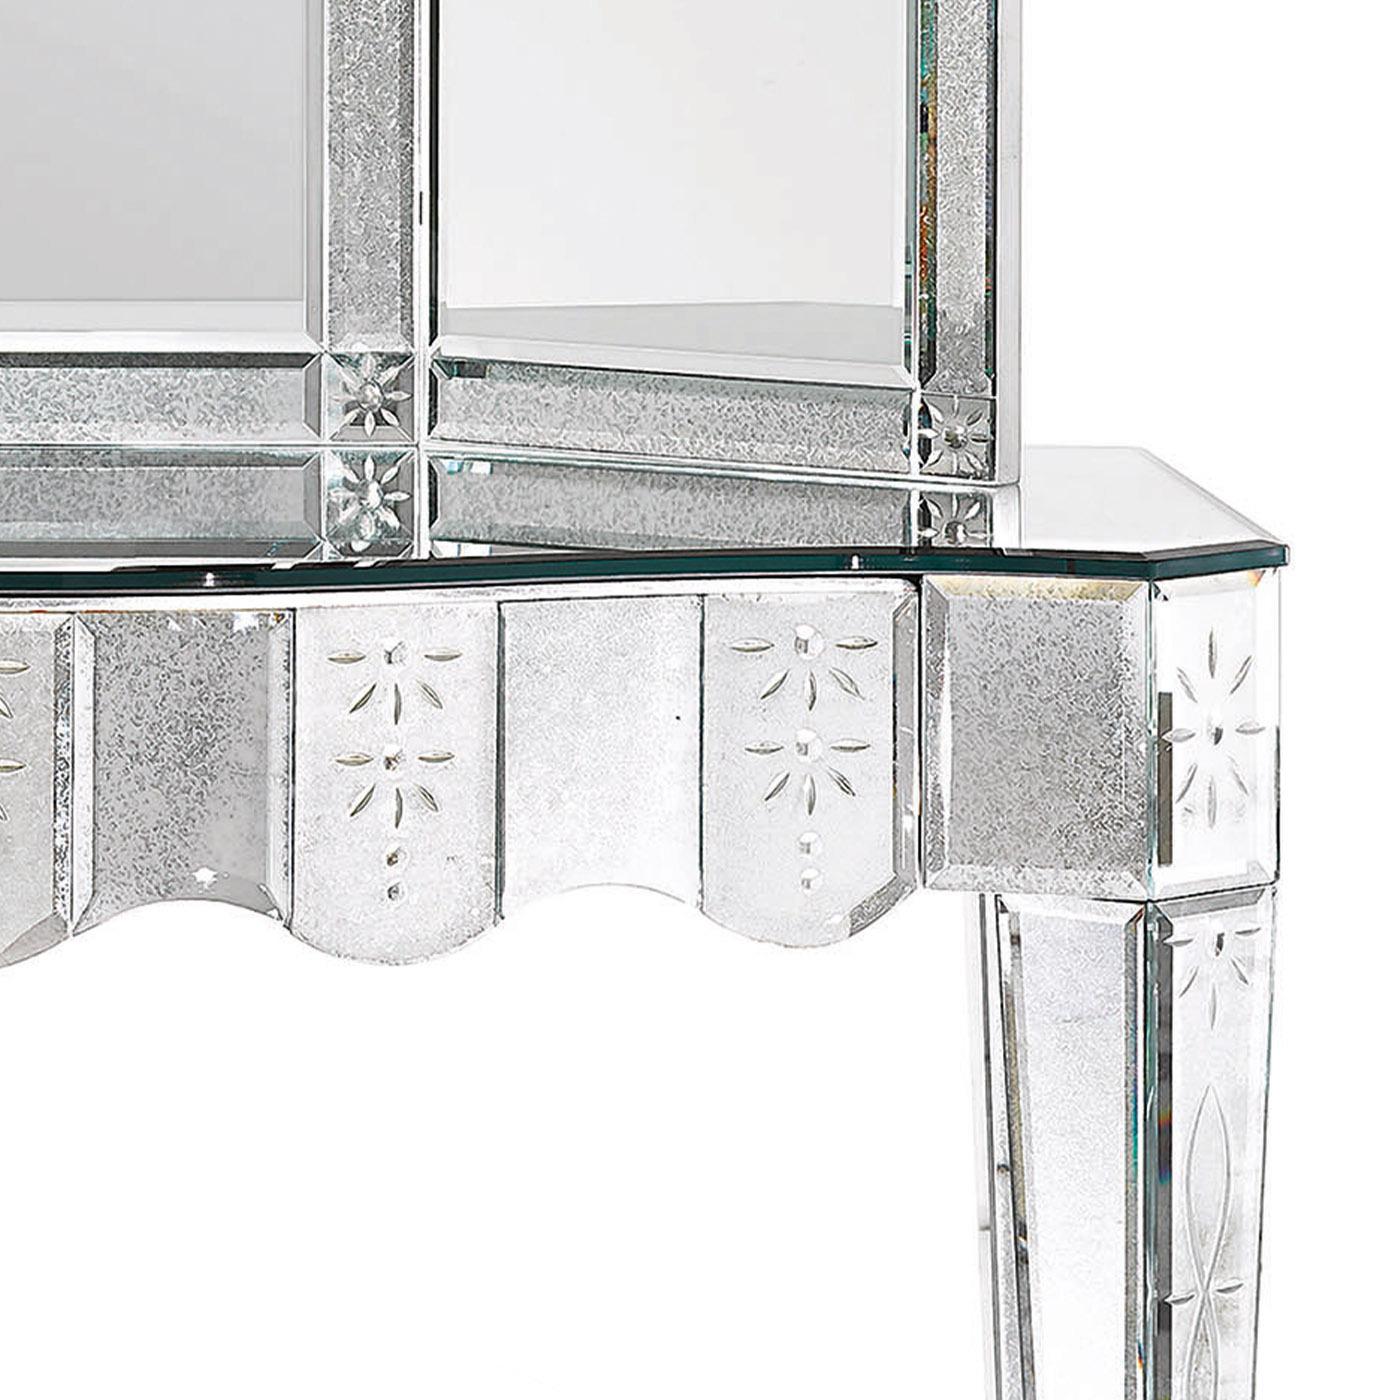 The Avogaria make-up desk of the Murano Collection has a distinct Venetian inspiration. The structure is made of wood with a silver leafed finish and the four tapered legs. The top and back-side are made of beveled glass with a medium antique